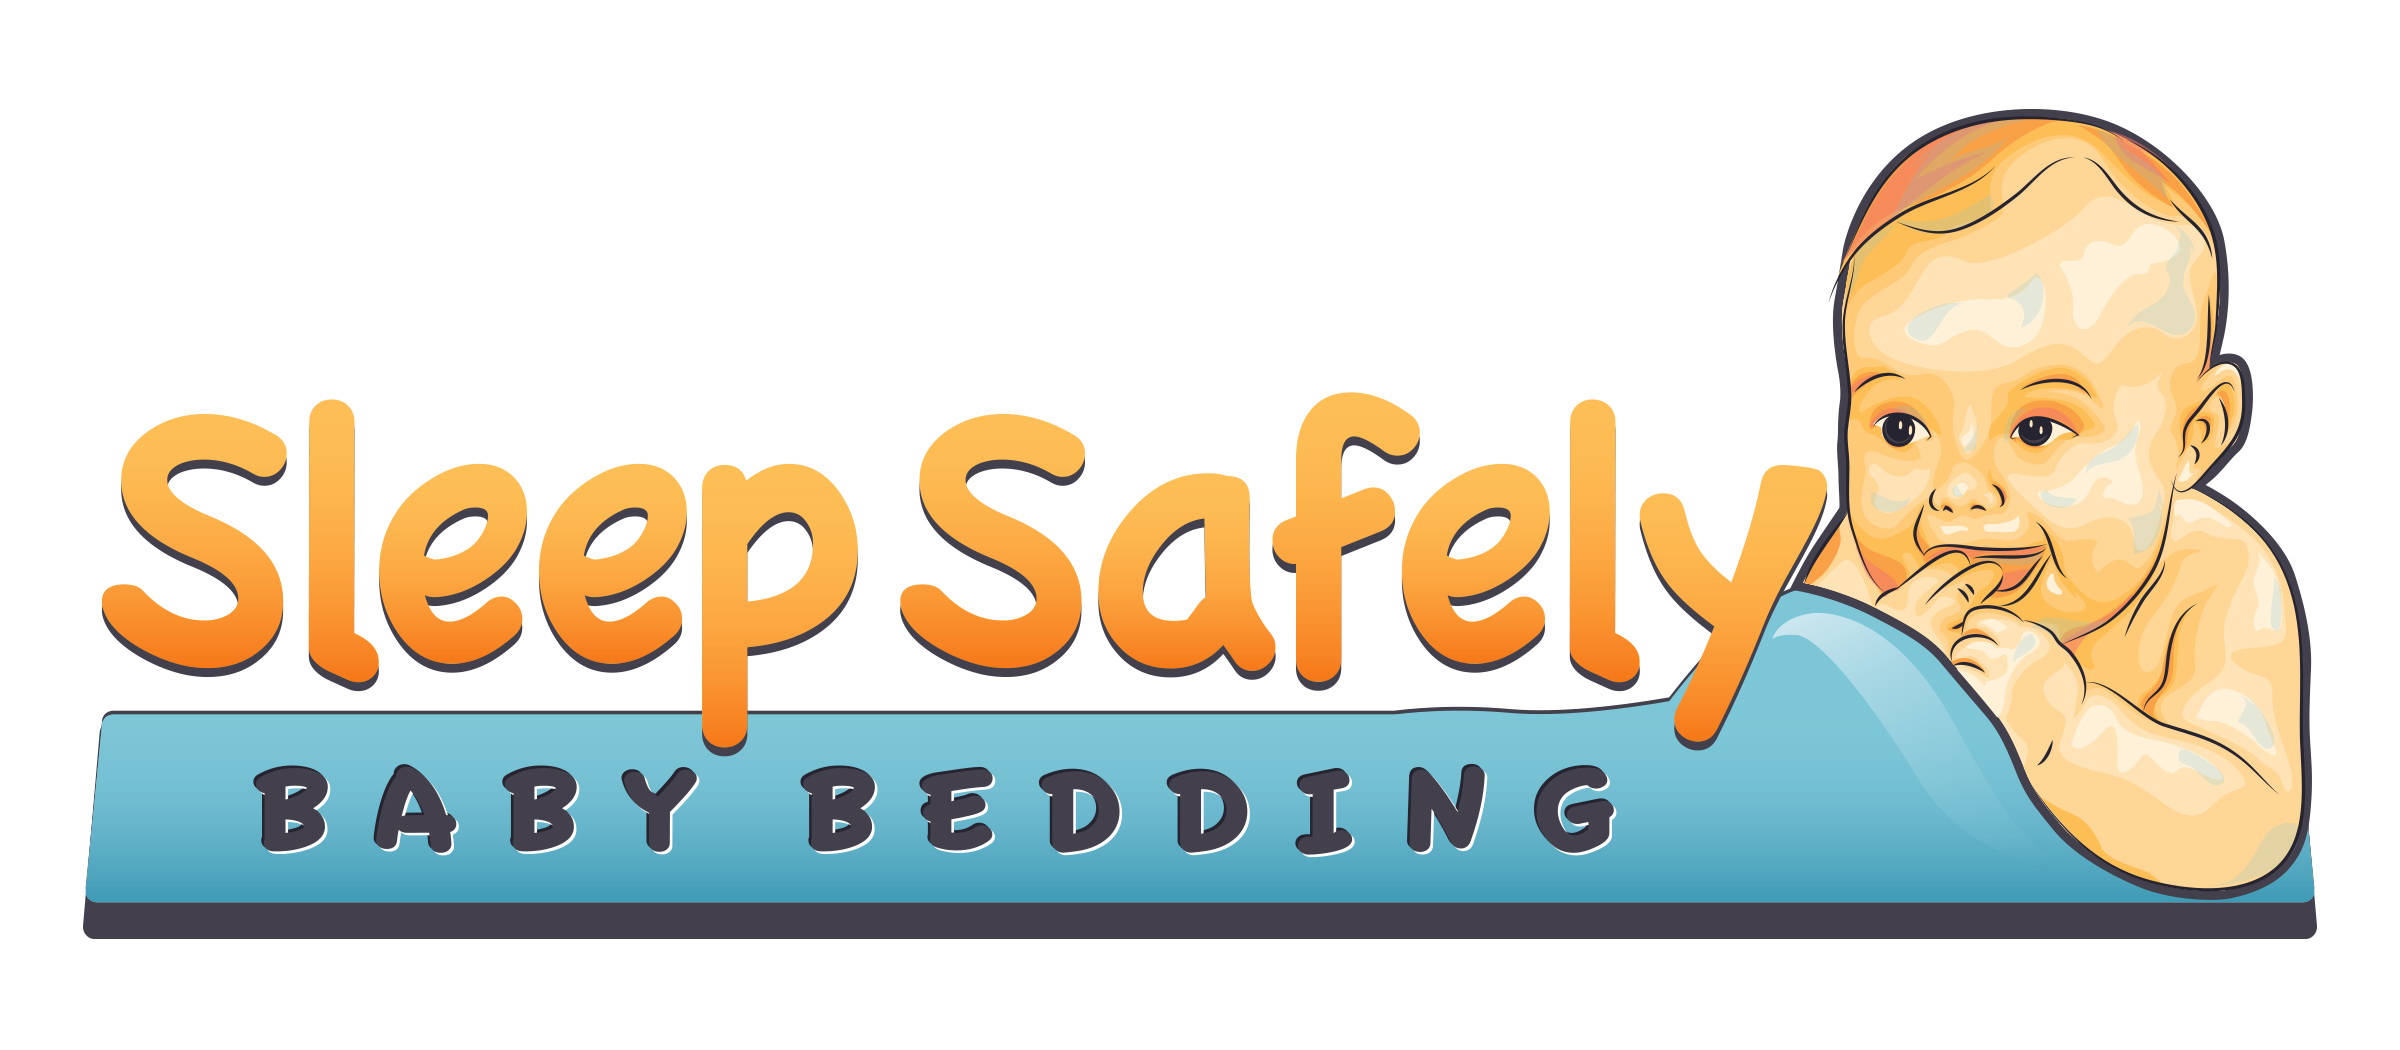 Sleep Safely Baby Bedding is a baby invention which every parent of an infant or toddler should attach to their child’s crib or bed.